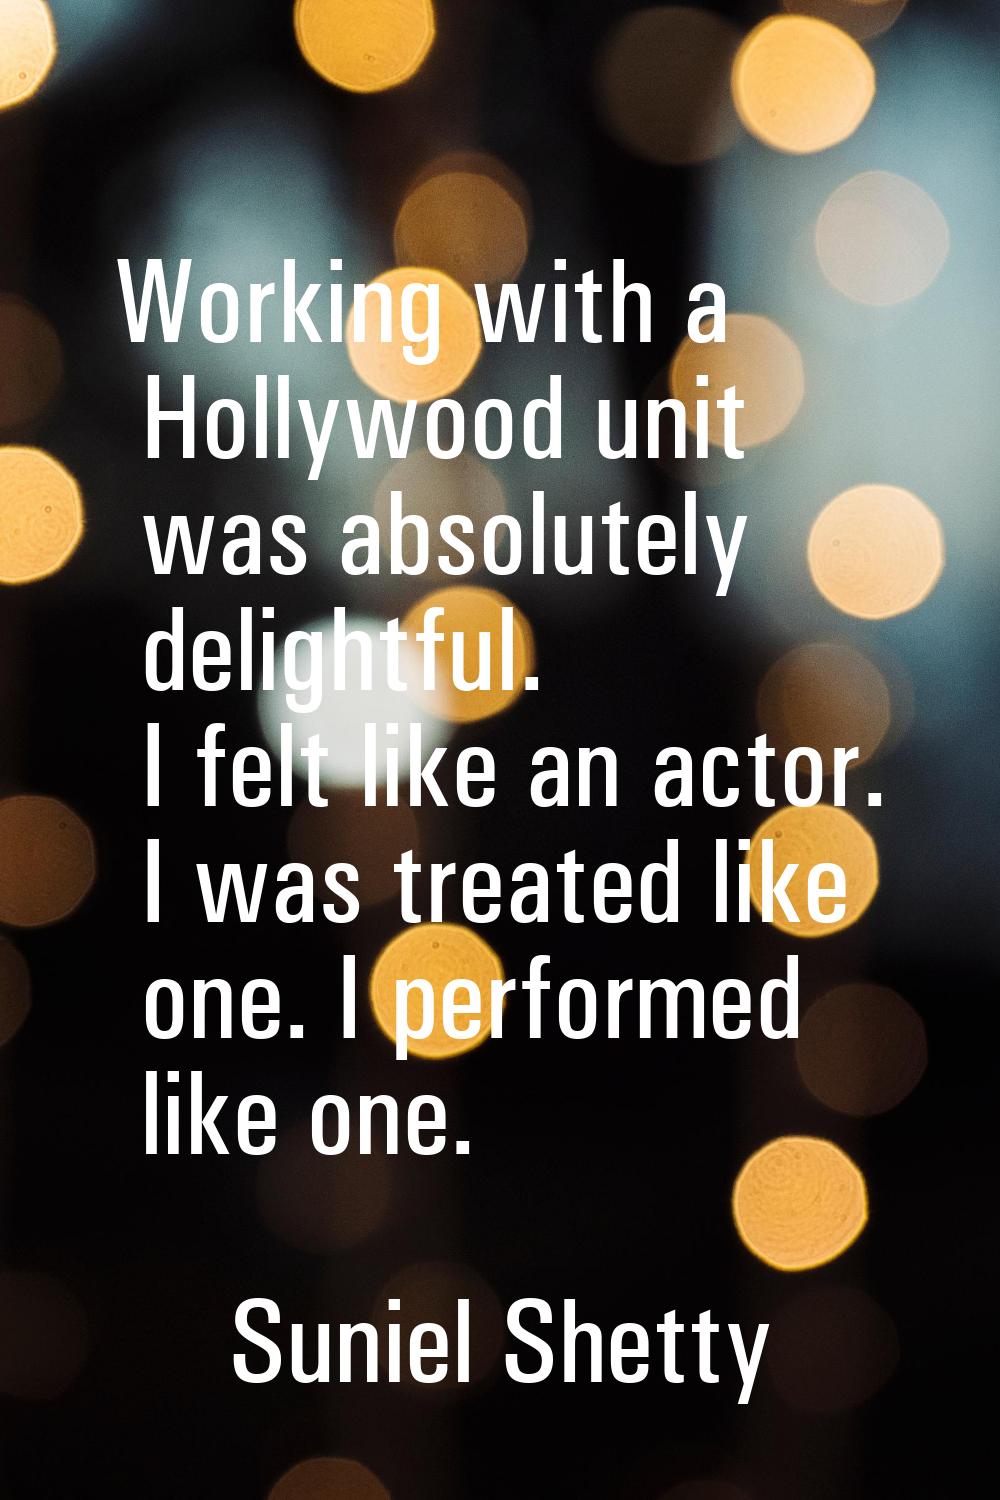 Working with a Hollywood unit was absolutely delightful. I felt like an actor. I was treated like o